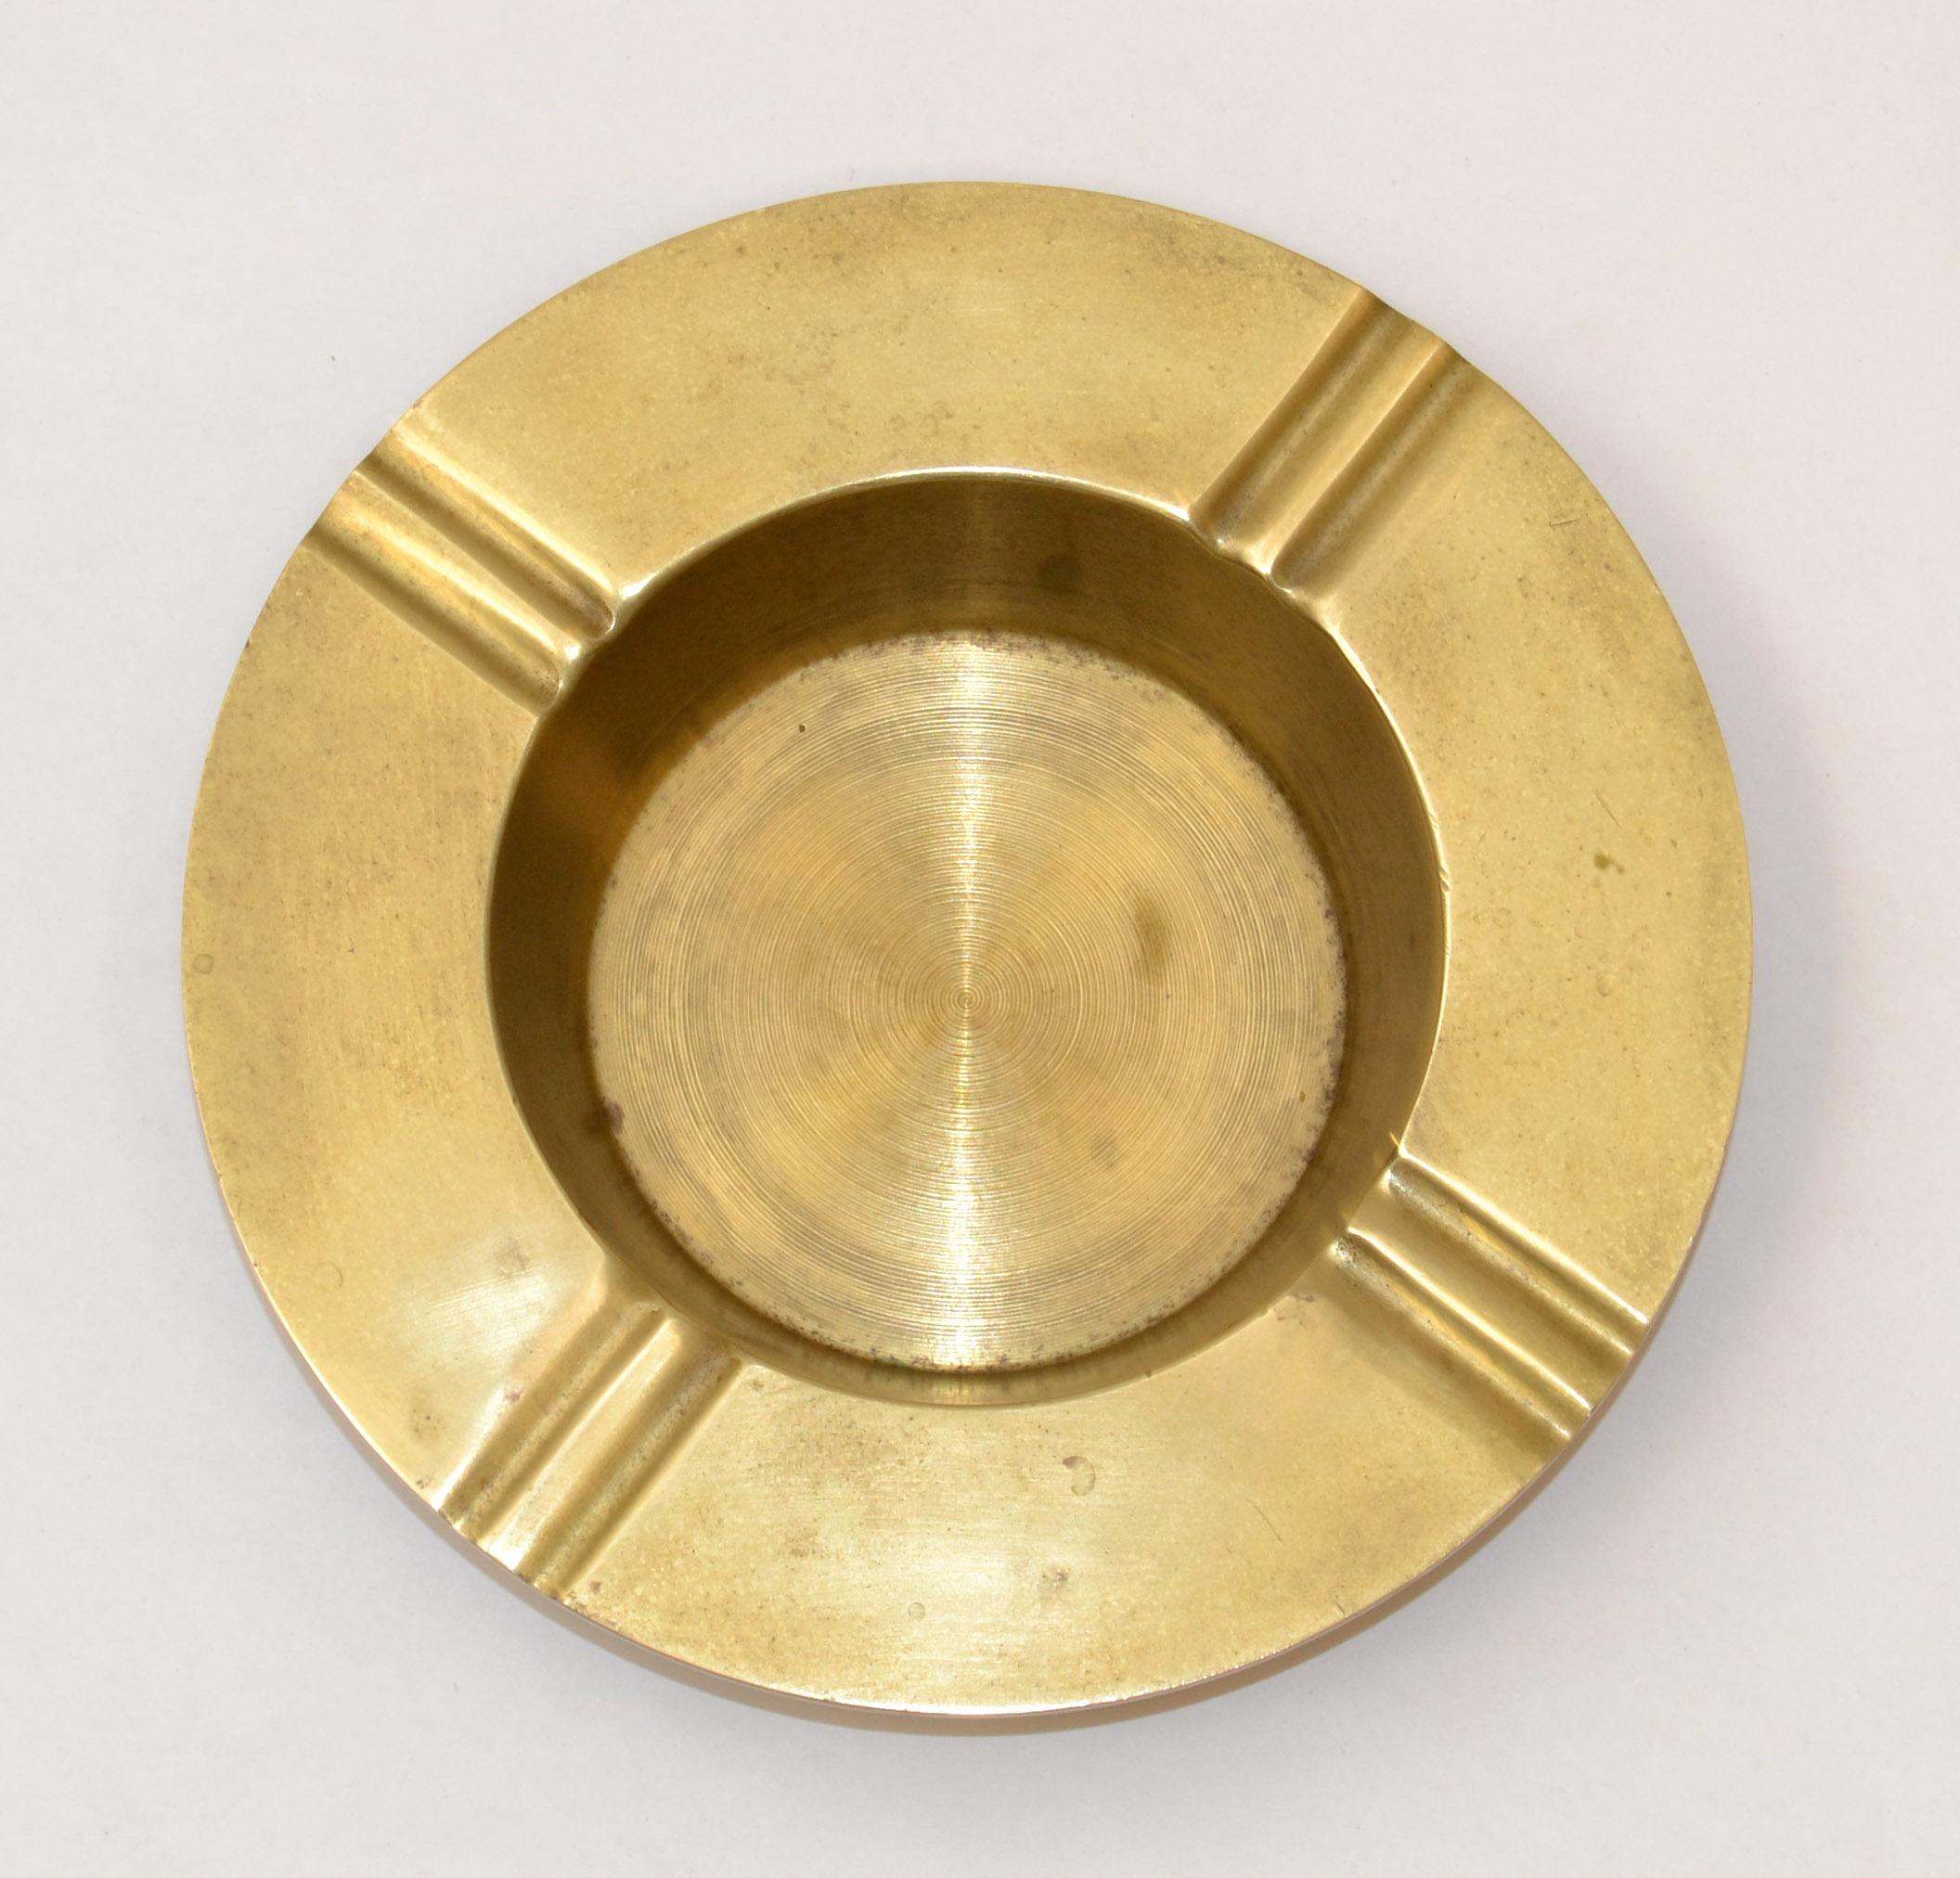 Mid-Century Modern patinated brass ashtray, catchall, vide-poche or Desk Accessories. 
Maked with gold foil label at the base, Made in Taiwan.
In good vintage condition with warm aged patina.